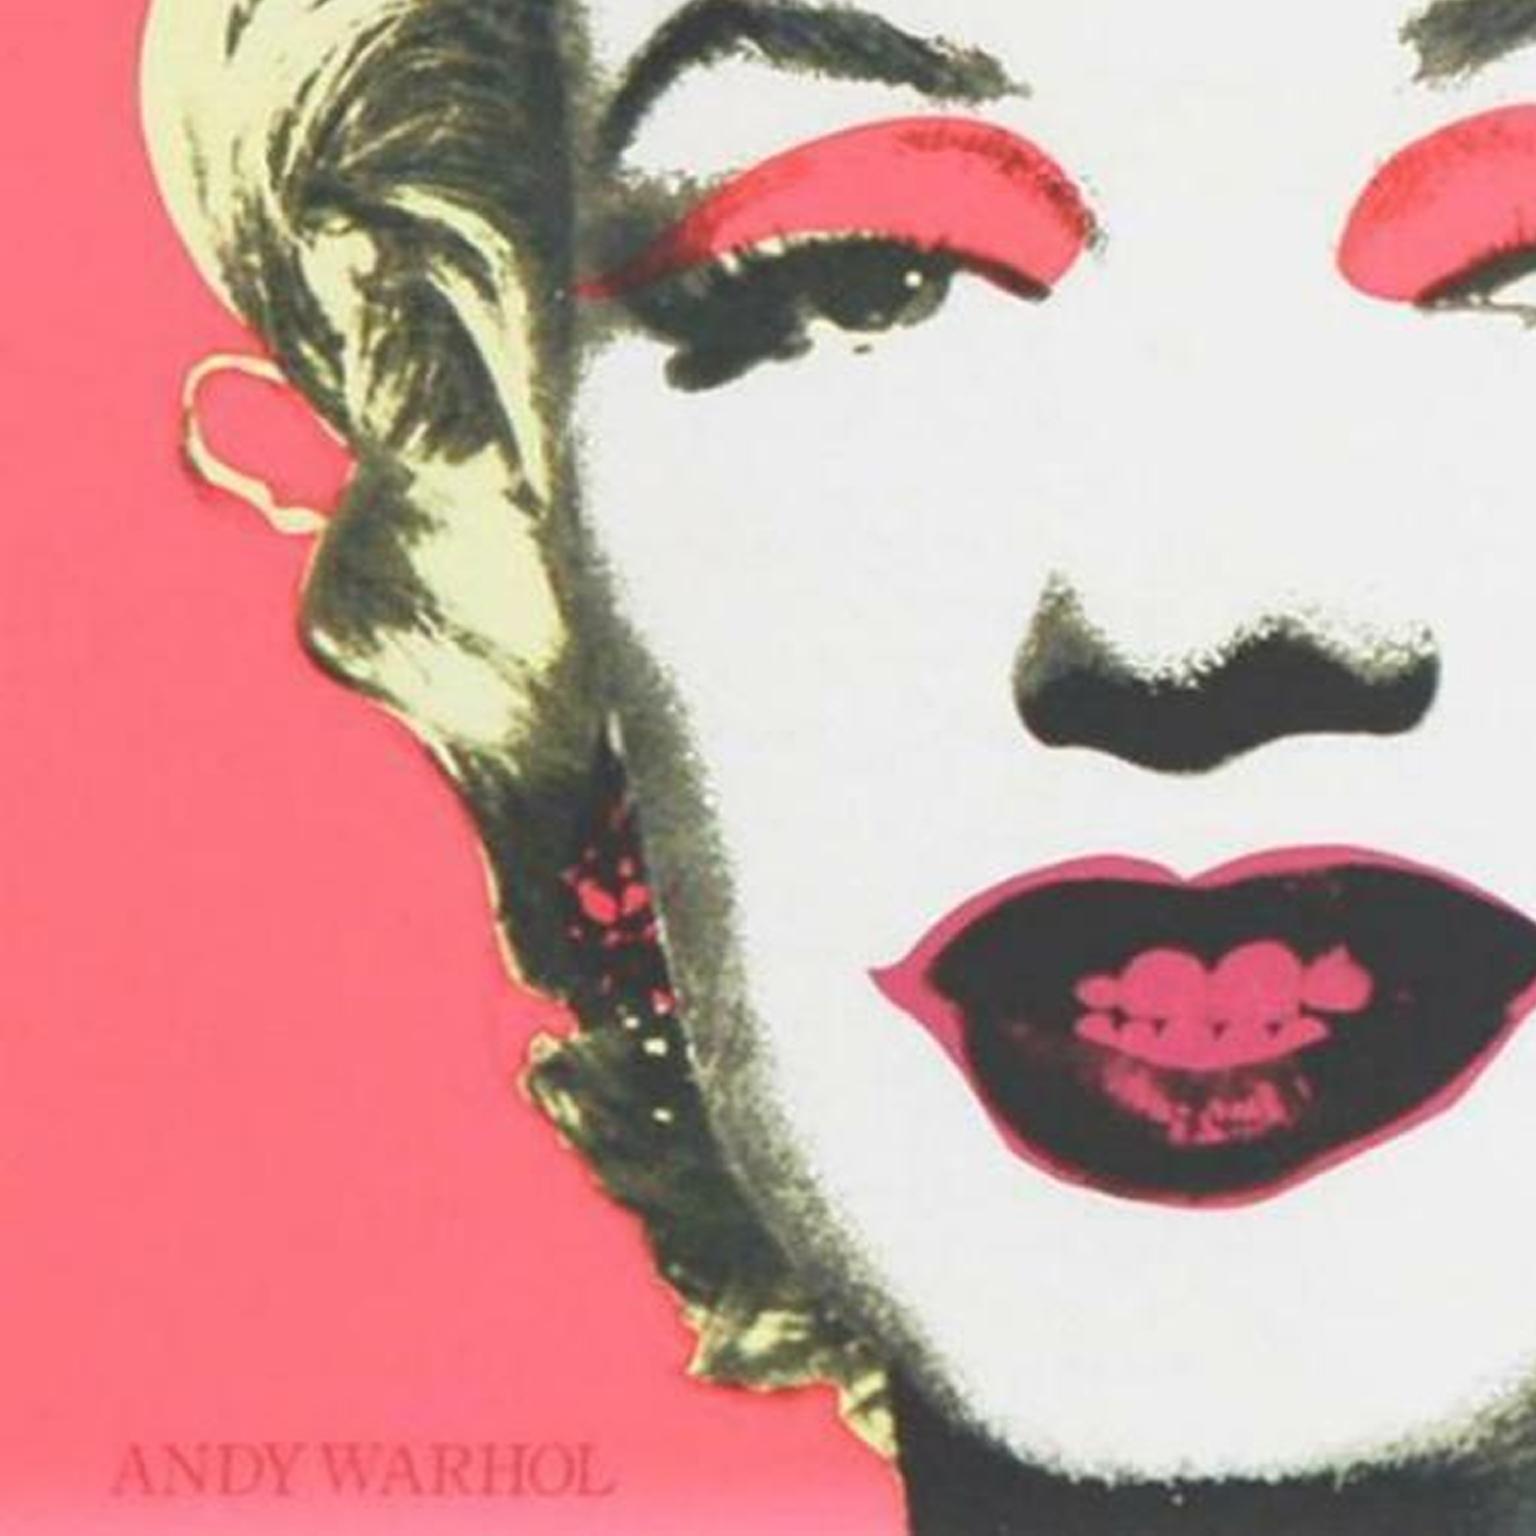 *Andy Warhol Marilyn (Announcement) 1981 Hand signed offset lithograph printed in colours

*From the edition of an unknown size

*Paper Size: 12 x 12 inch, (305 x 305mm) 

*Images Size: 12 x 12 inch, (305 x 305mm) published by Castelli Graphics, New